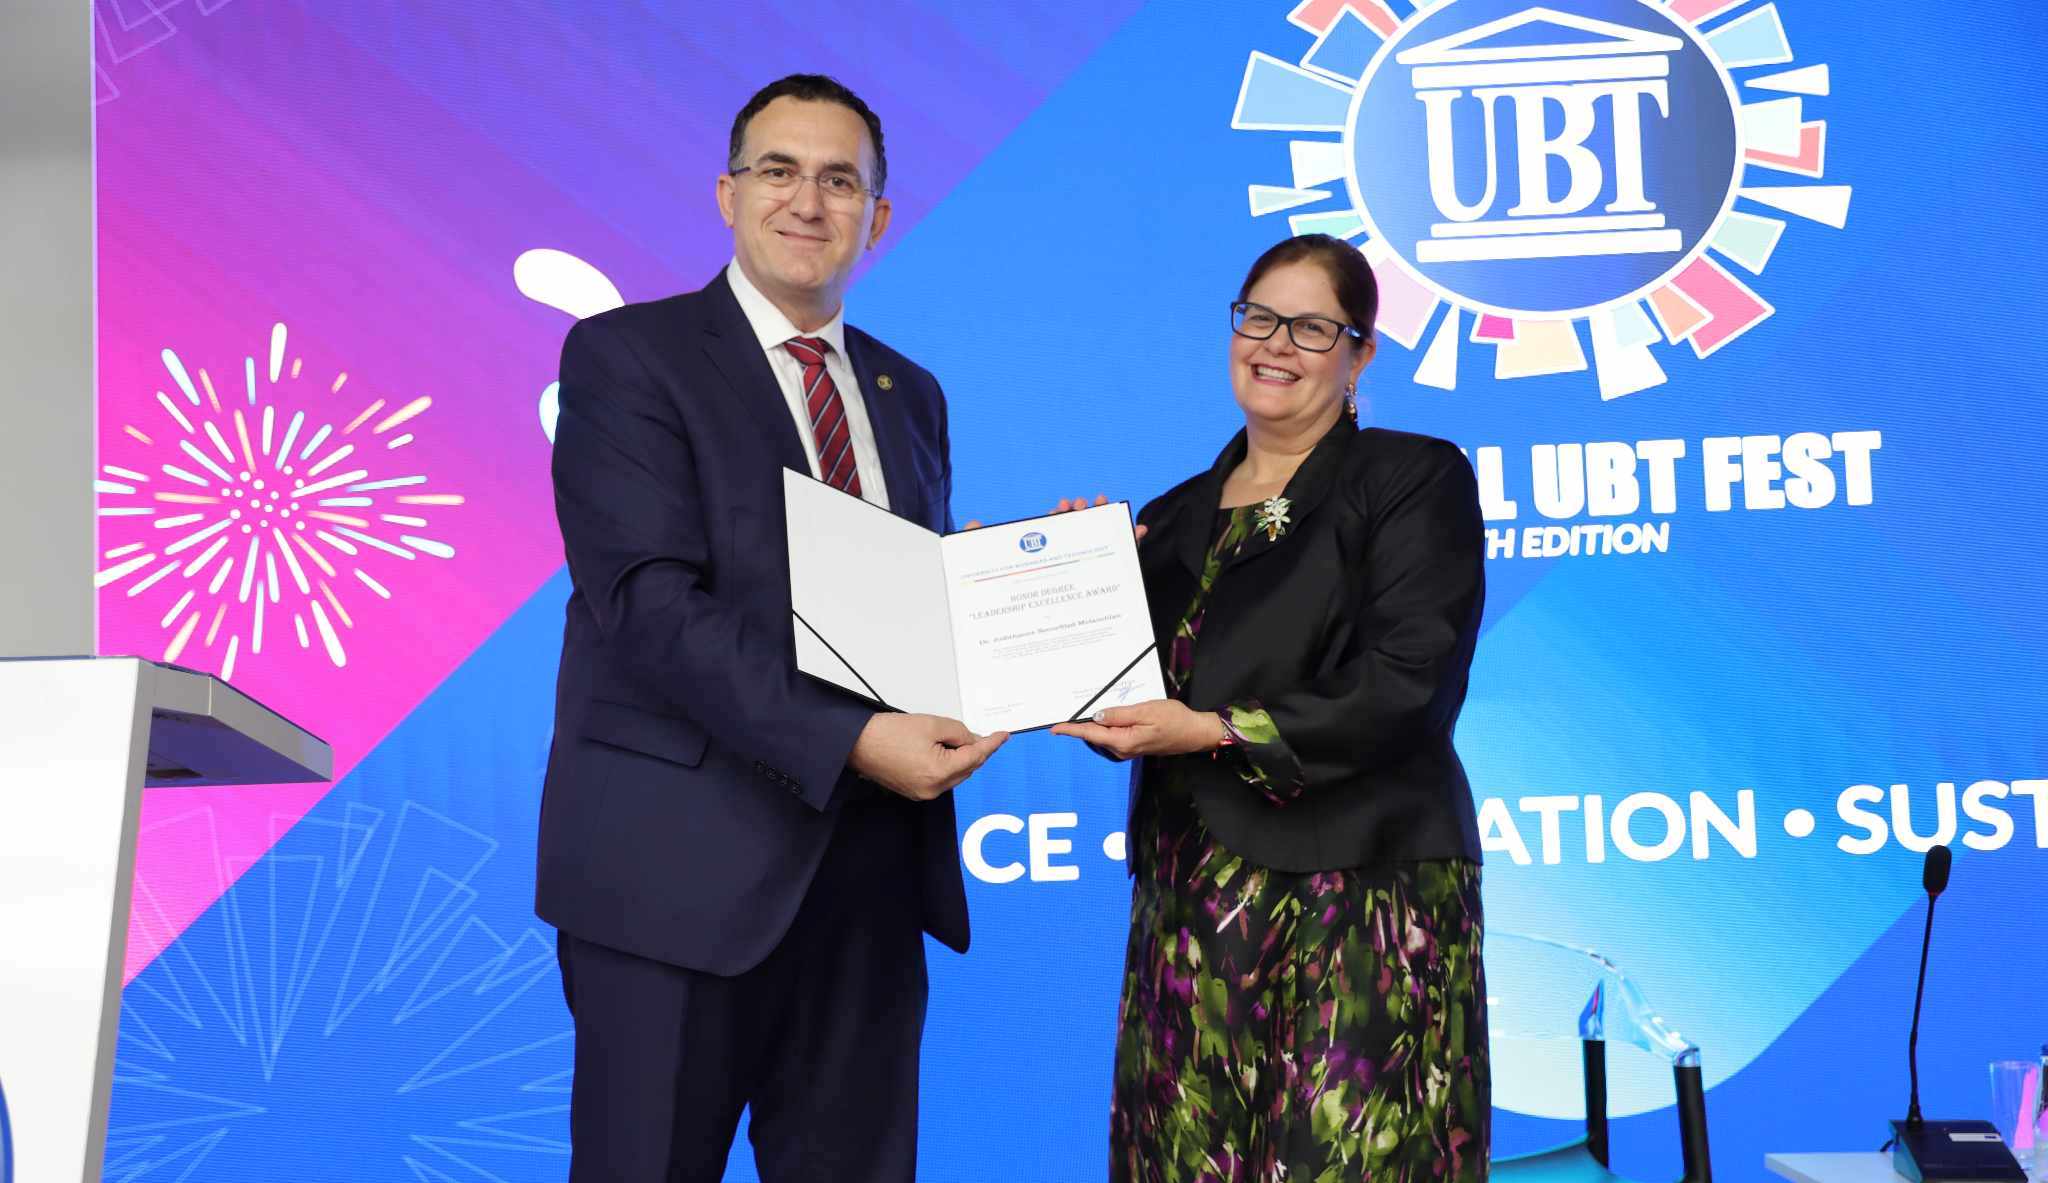 UBT awards the “Leadership Excellence Award” to Dr. Judithanne Scourfield Mclauchlan, in recognition of her dedication to promoting the rule of law and democracy